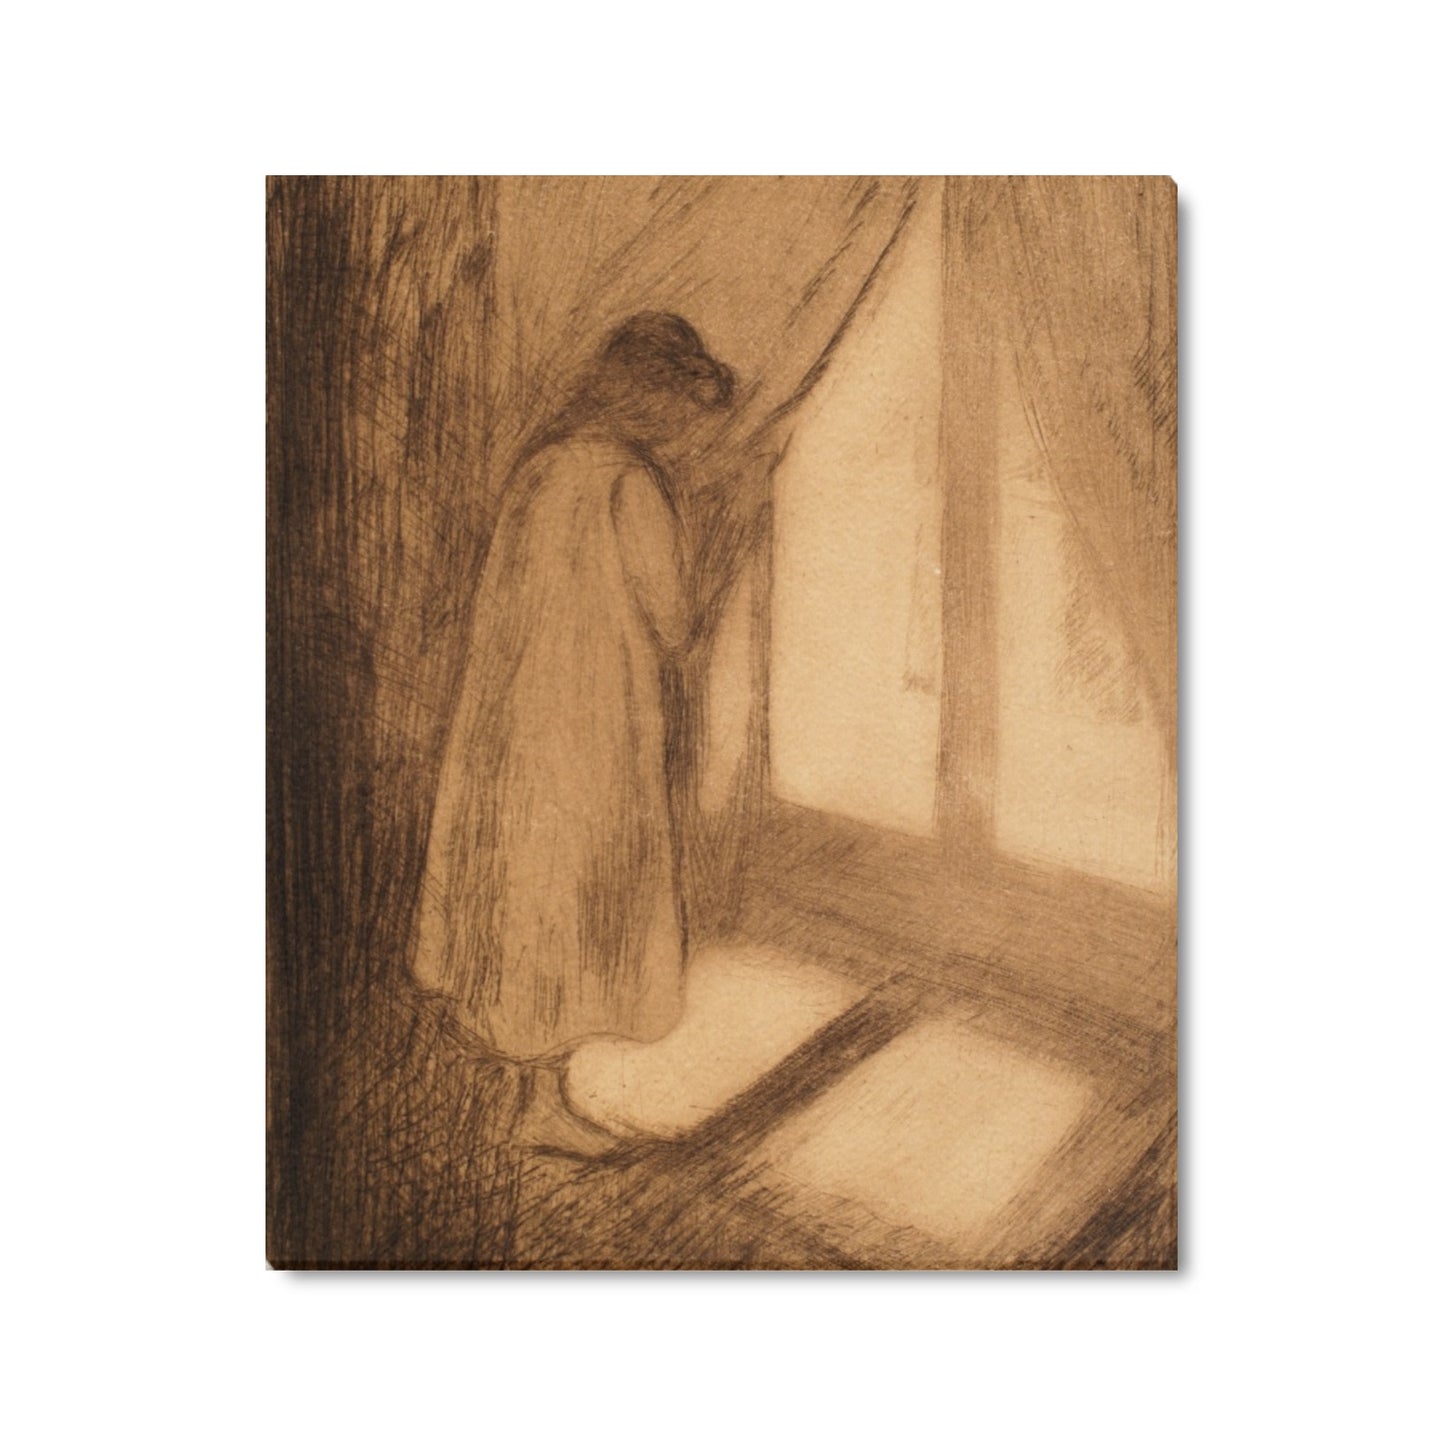 EDVARD MUNCH - THE GIRL AT THE WINDOW - CANVAS PRINT 20"x 24"